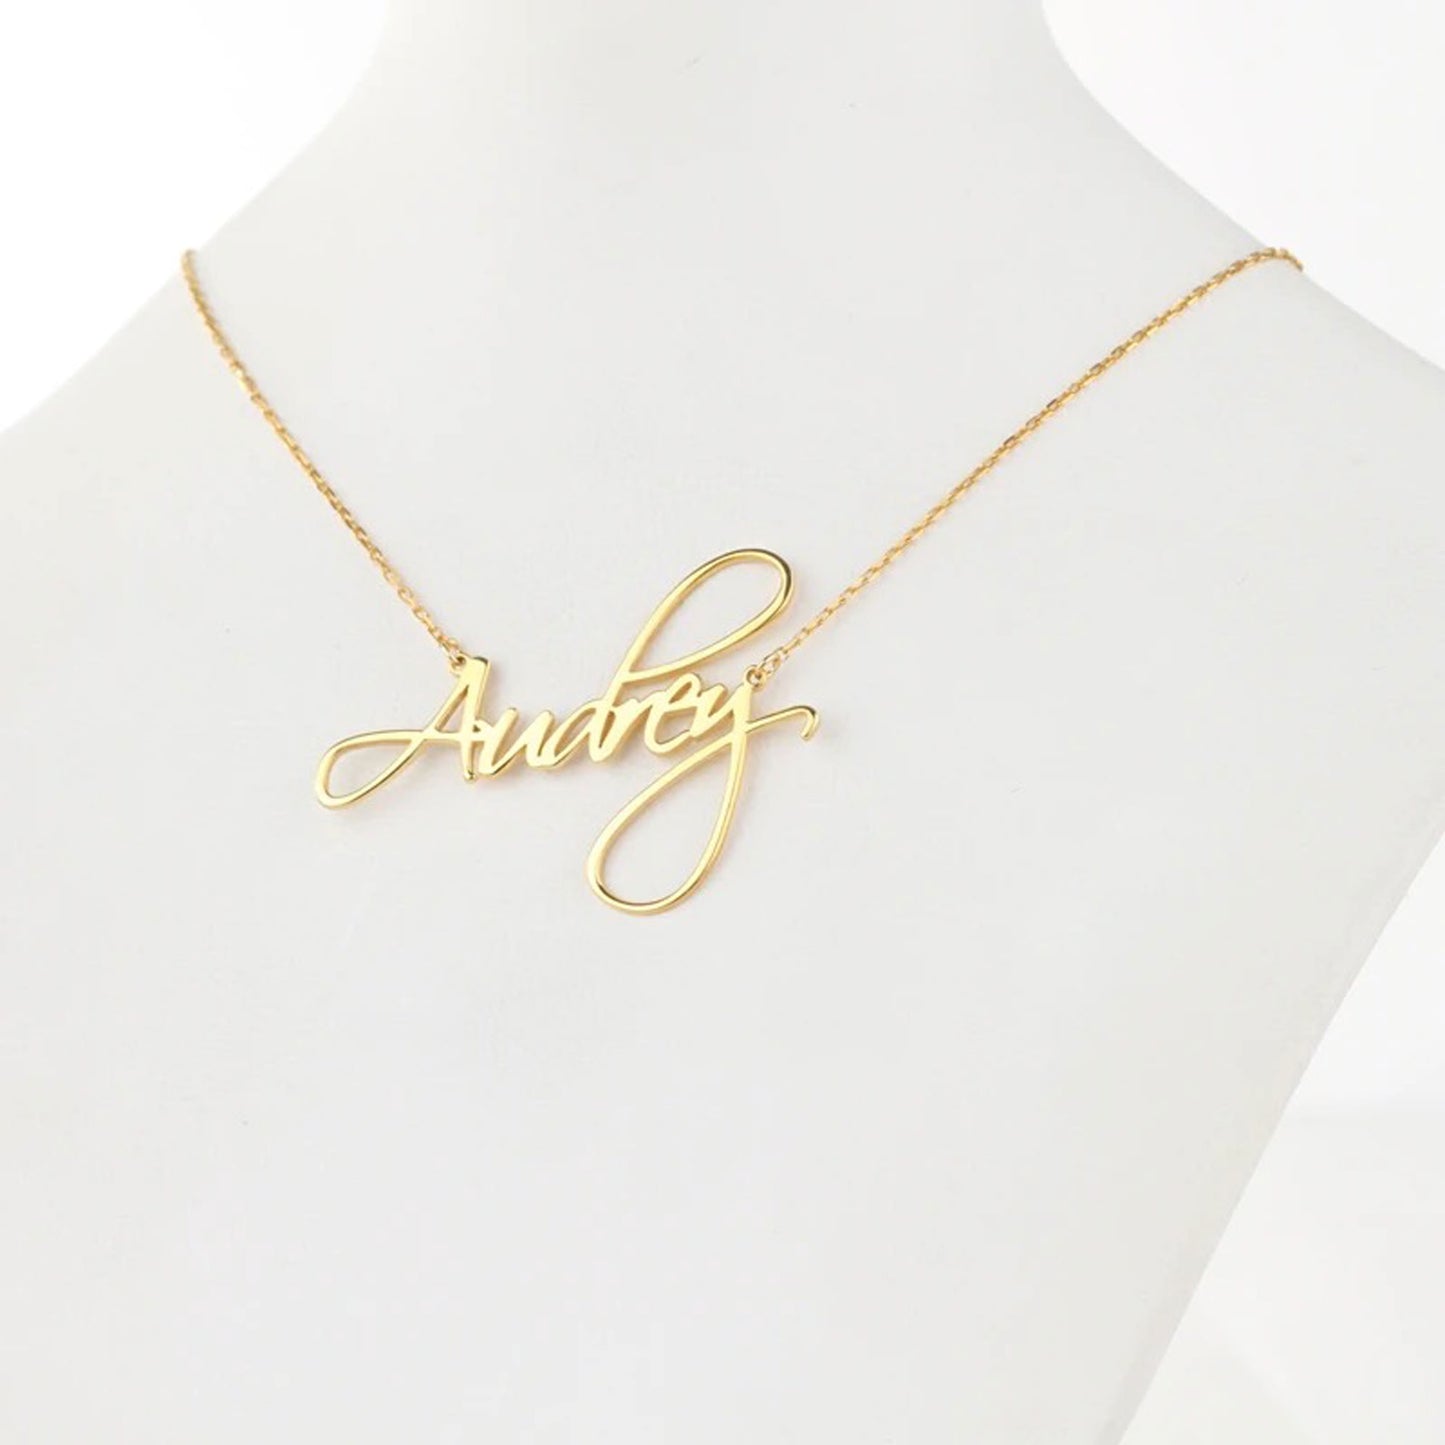 Image detail for - Gold-tone link chain and personalized script name necklace